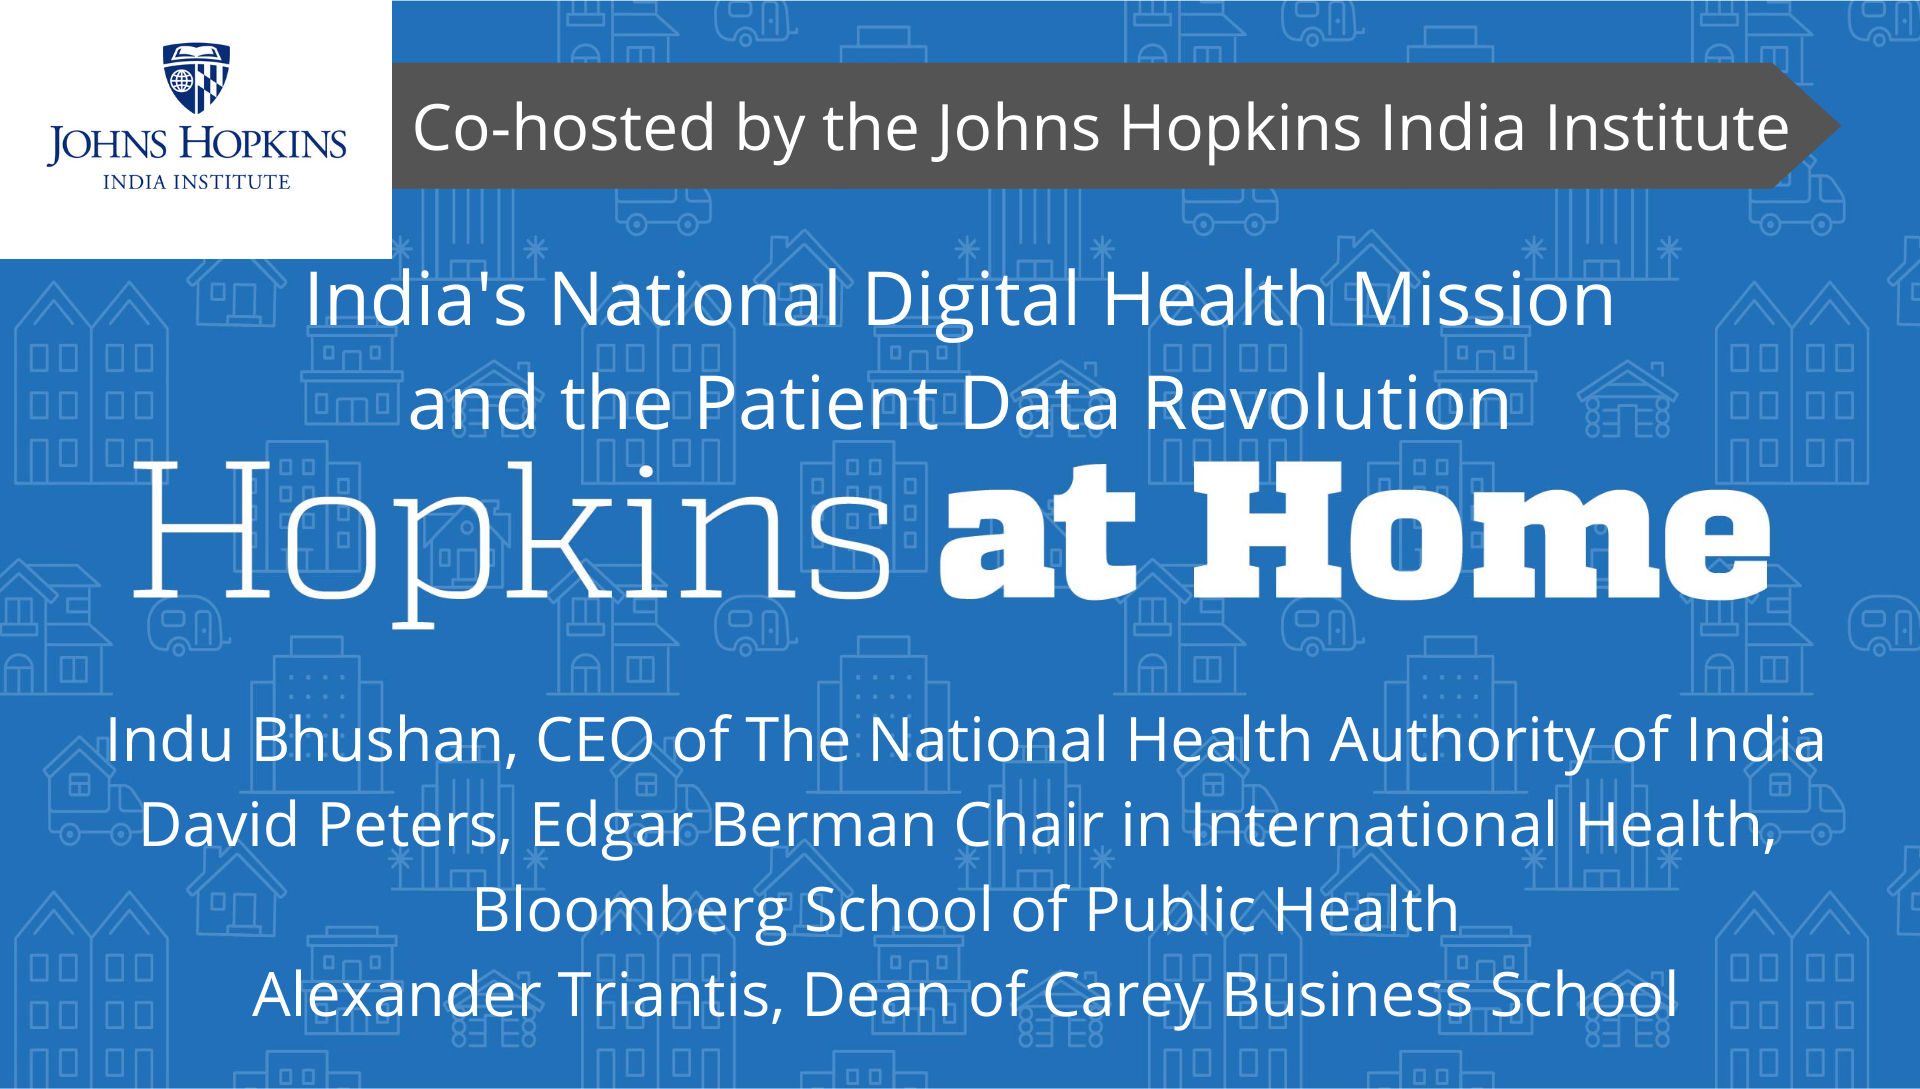 India's National Digital Health Mission and the Patient Data Revolution, Co-Hosted by the Johns Hopkins India Institute